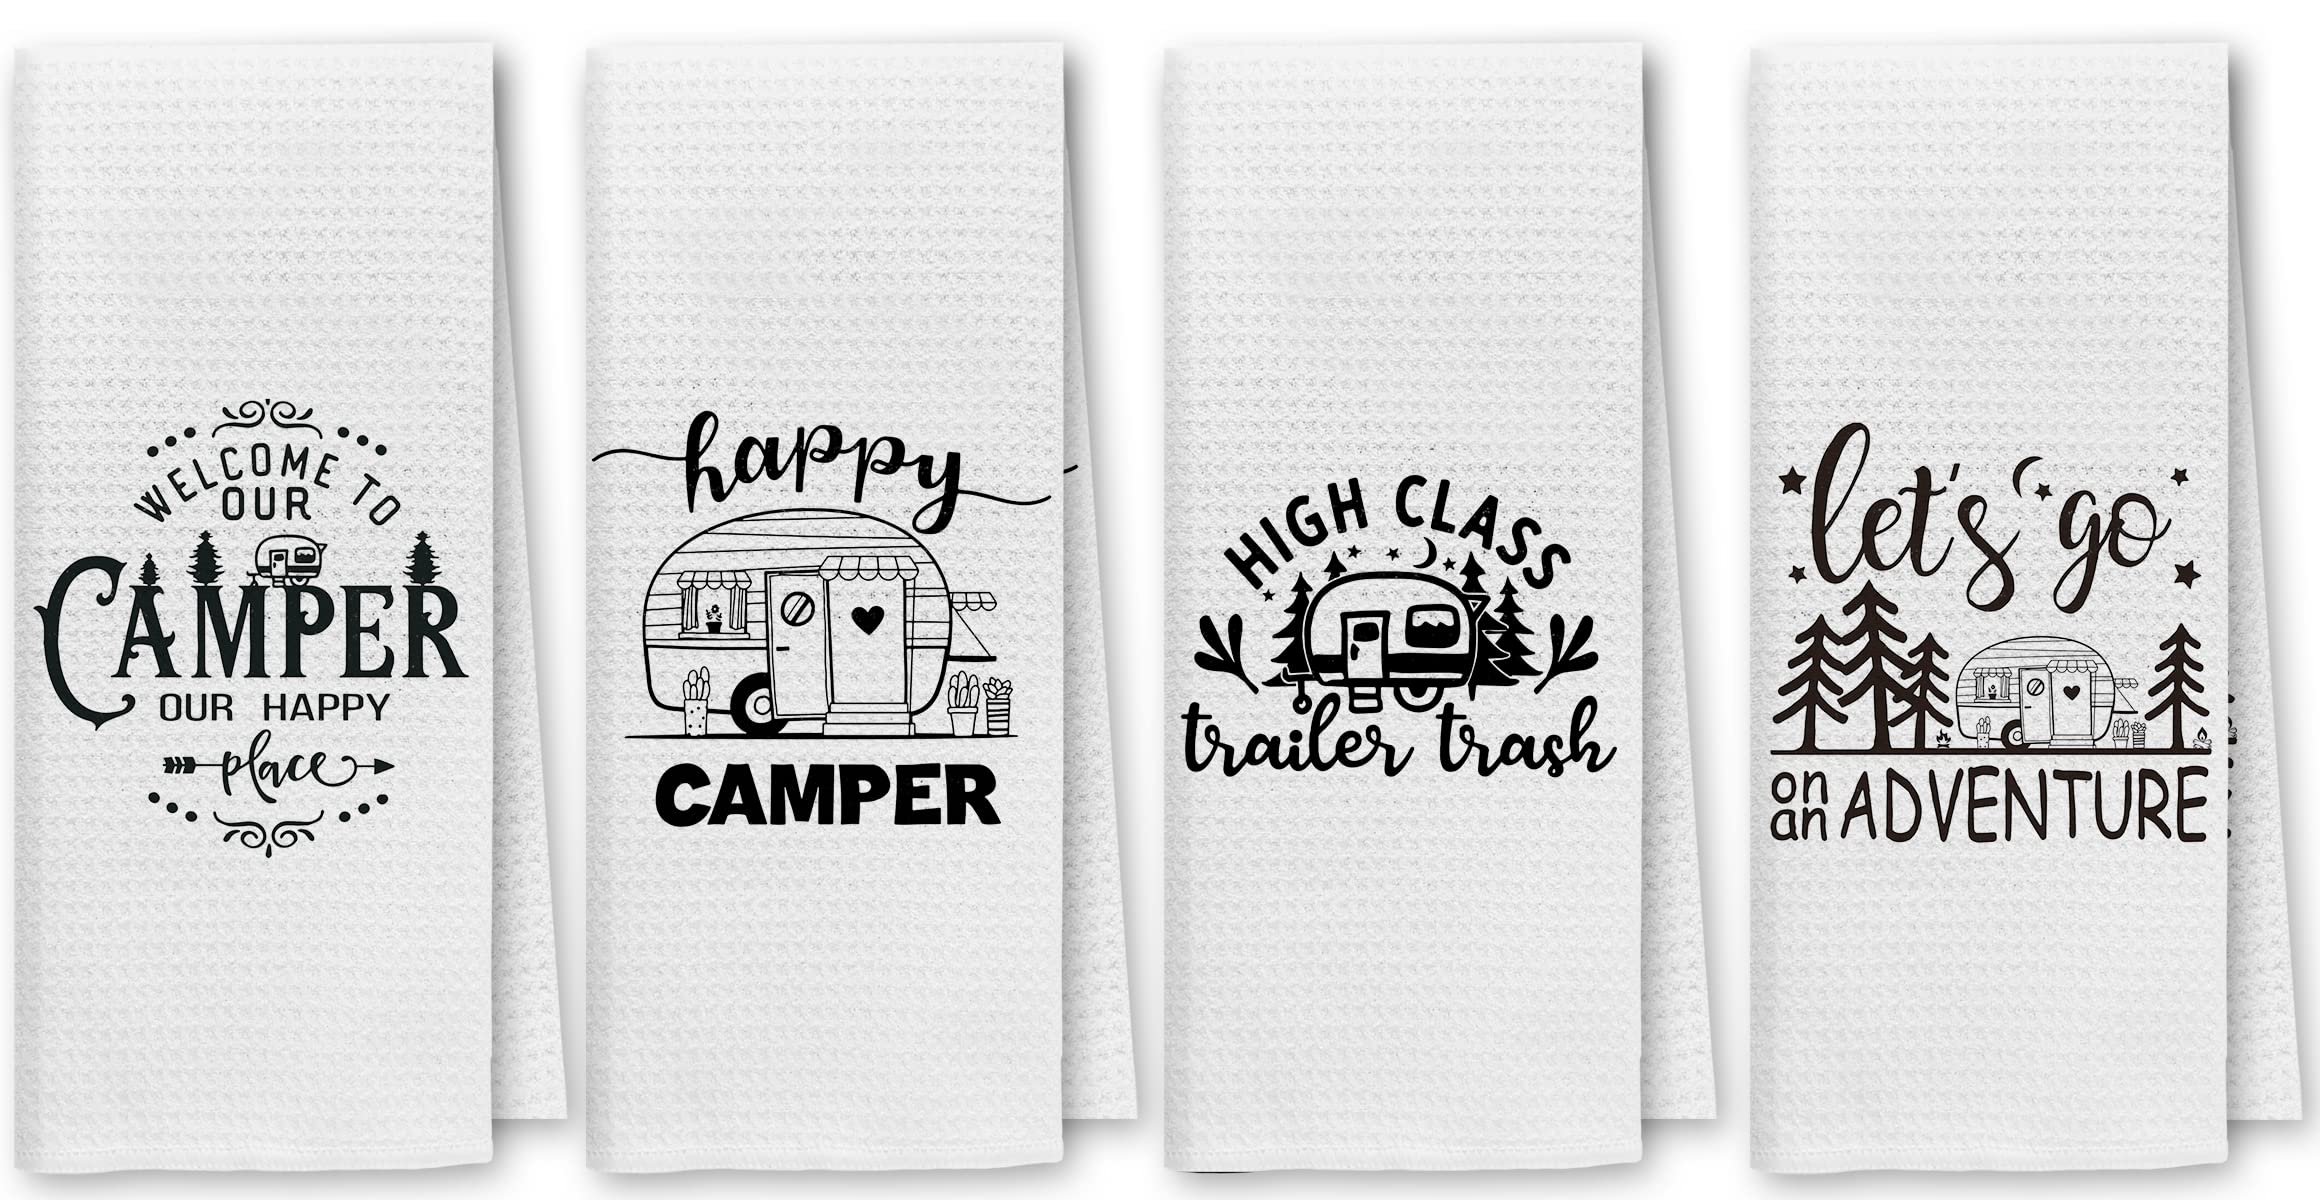 Dibor Happy Camper Funny Camping Kitchen Towels Dish Towels Dishcloth Set of 4,Campsite Cabin RV Decorative Absorbent Drying Cloth Hand Towels Tea Towels for Bathroom Kitchen,Campers Gifts